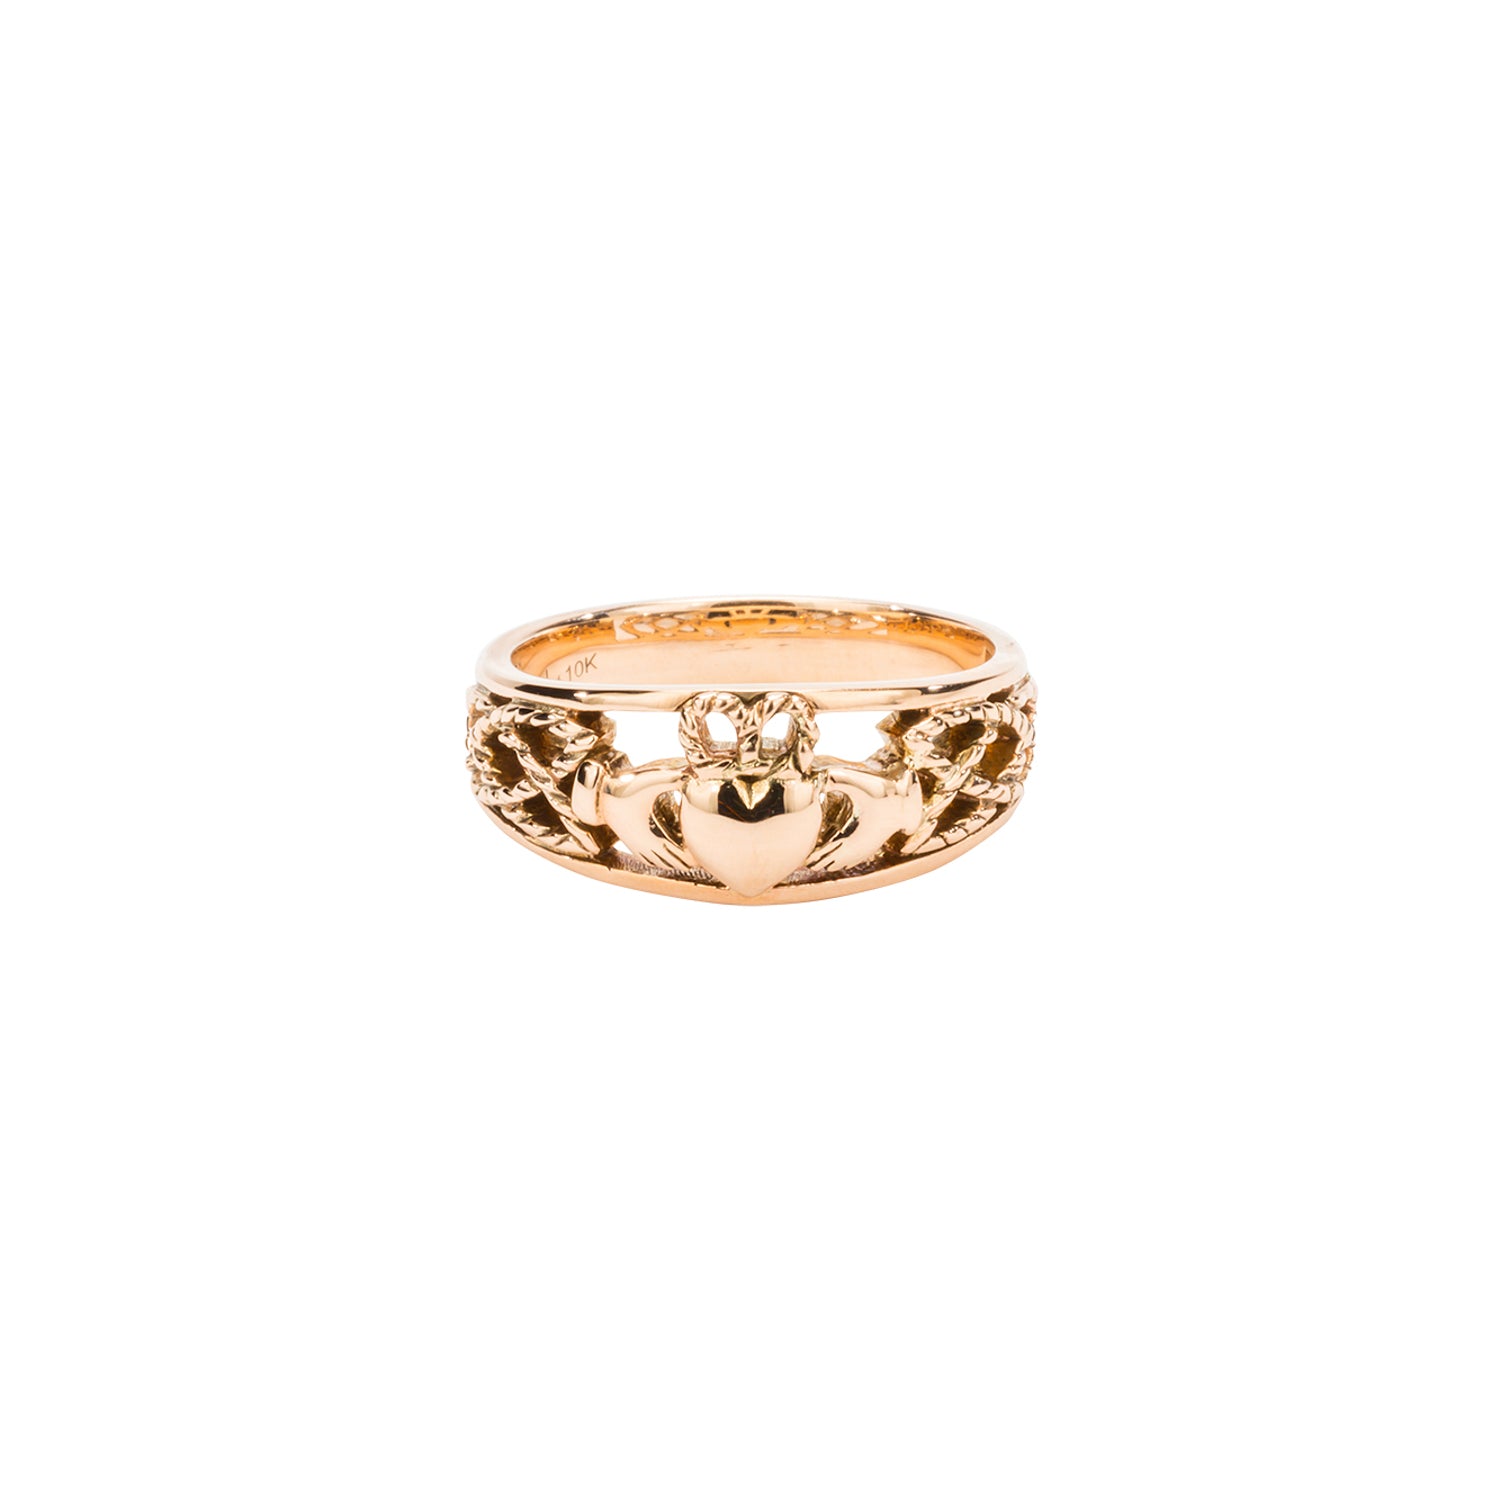 Buy Sterling Silver Claddagh Ring, Rose Gold Celtic Knot Claddagh Ring,  Irish Heart and Hands Ring Online in India - Etsy